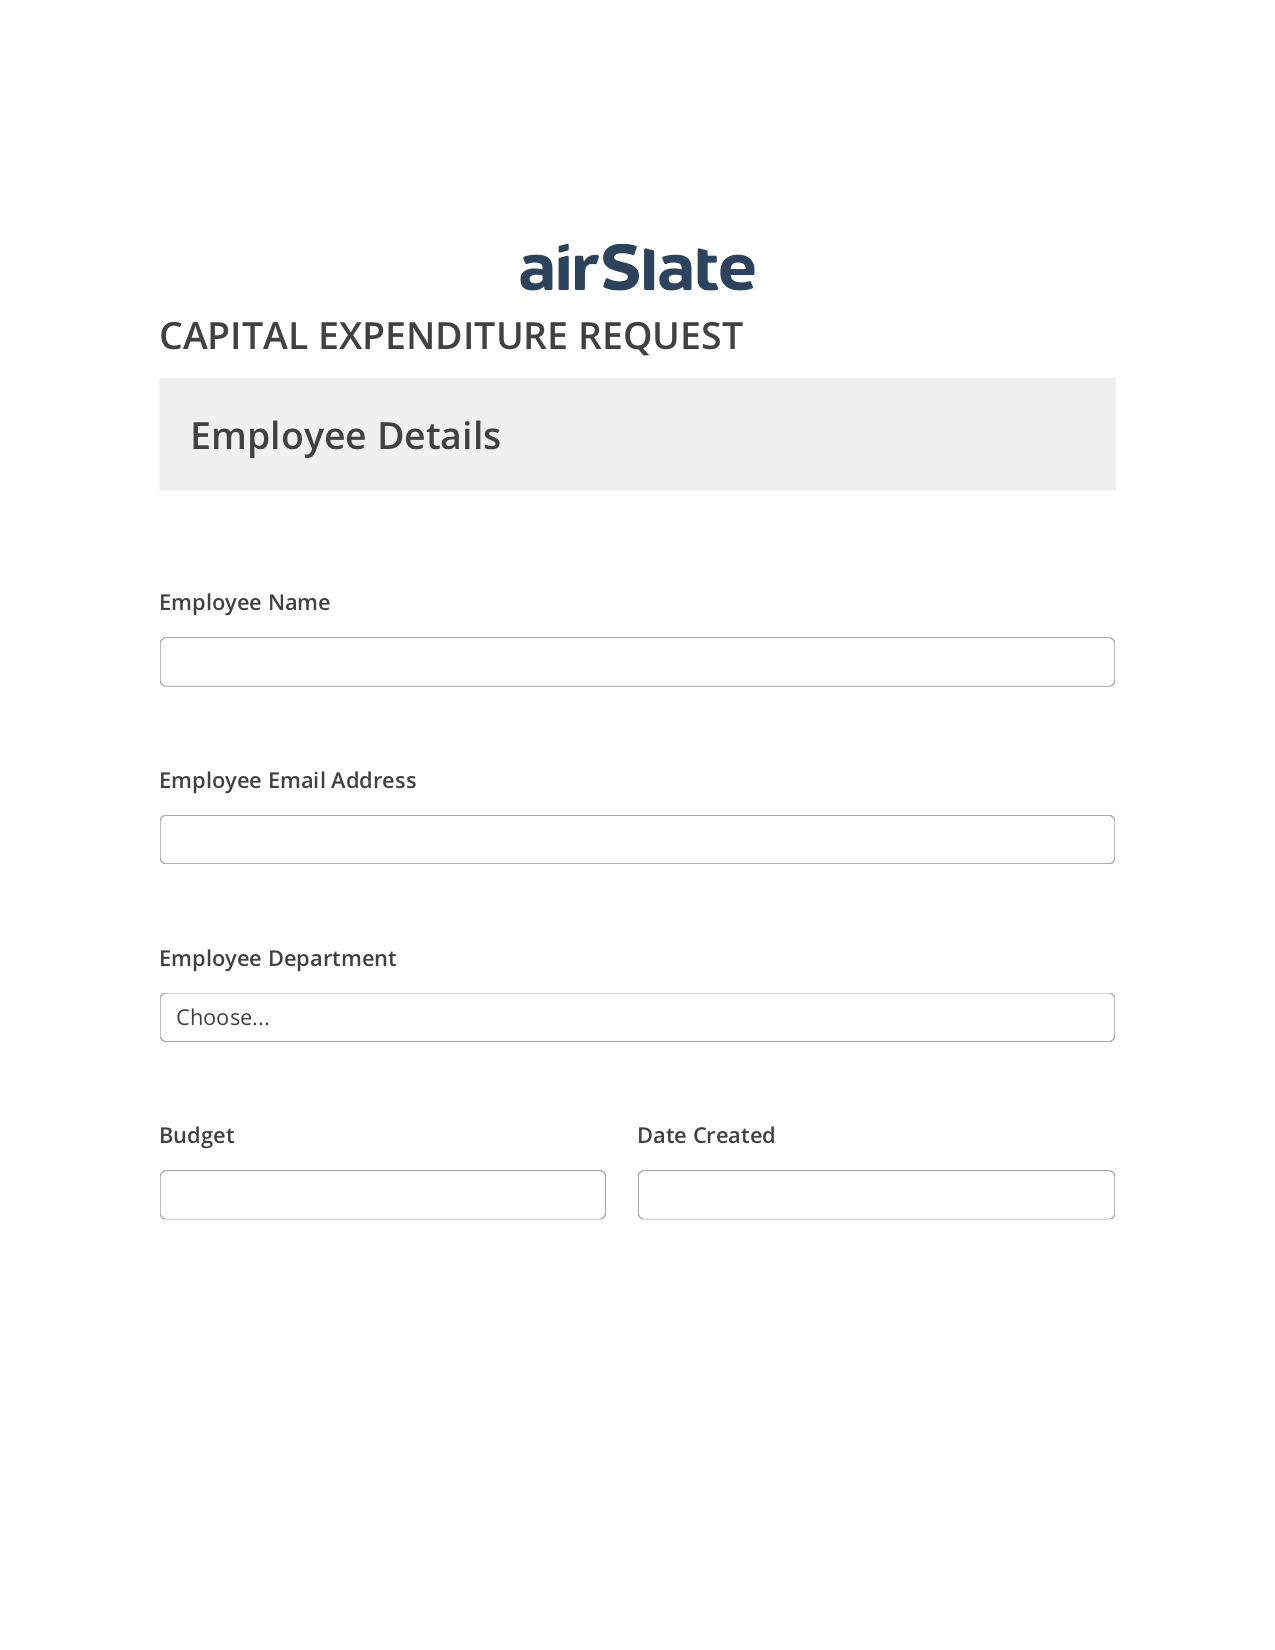 Capital Expenditure Request Approval Workflow Pre-fill from Google Sheets Bot, Create slate from another Flow Bot, Email Notification Postfinish Bot